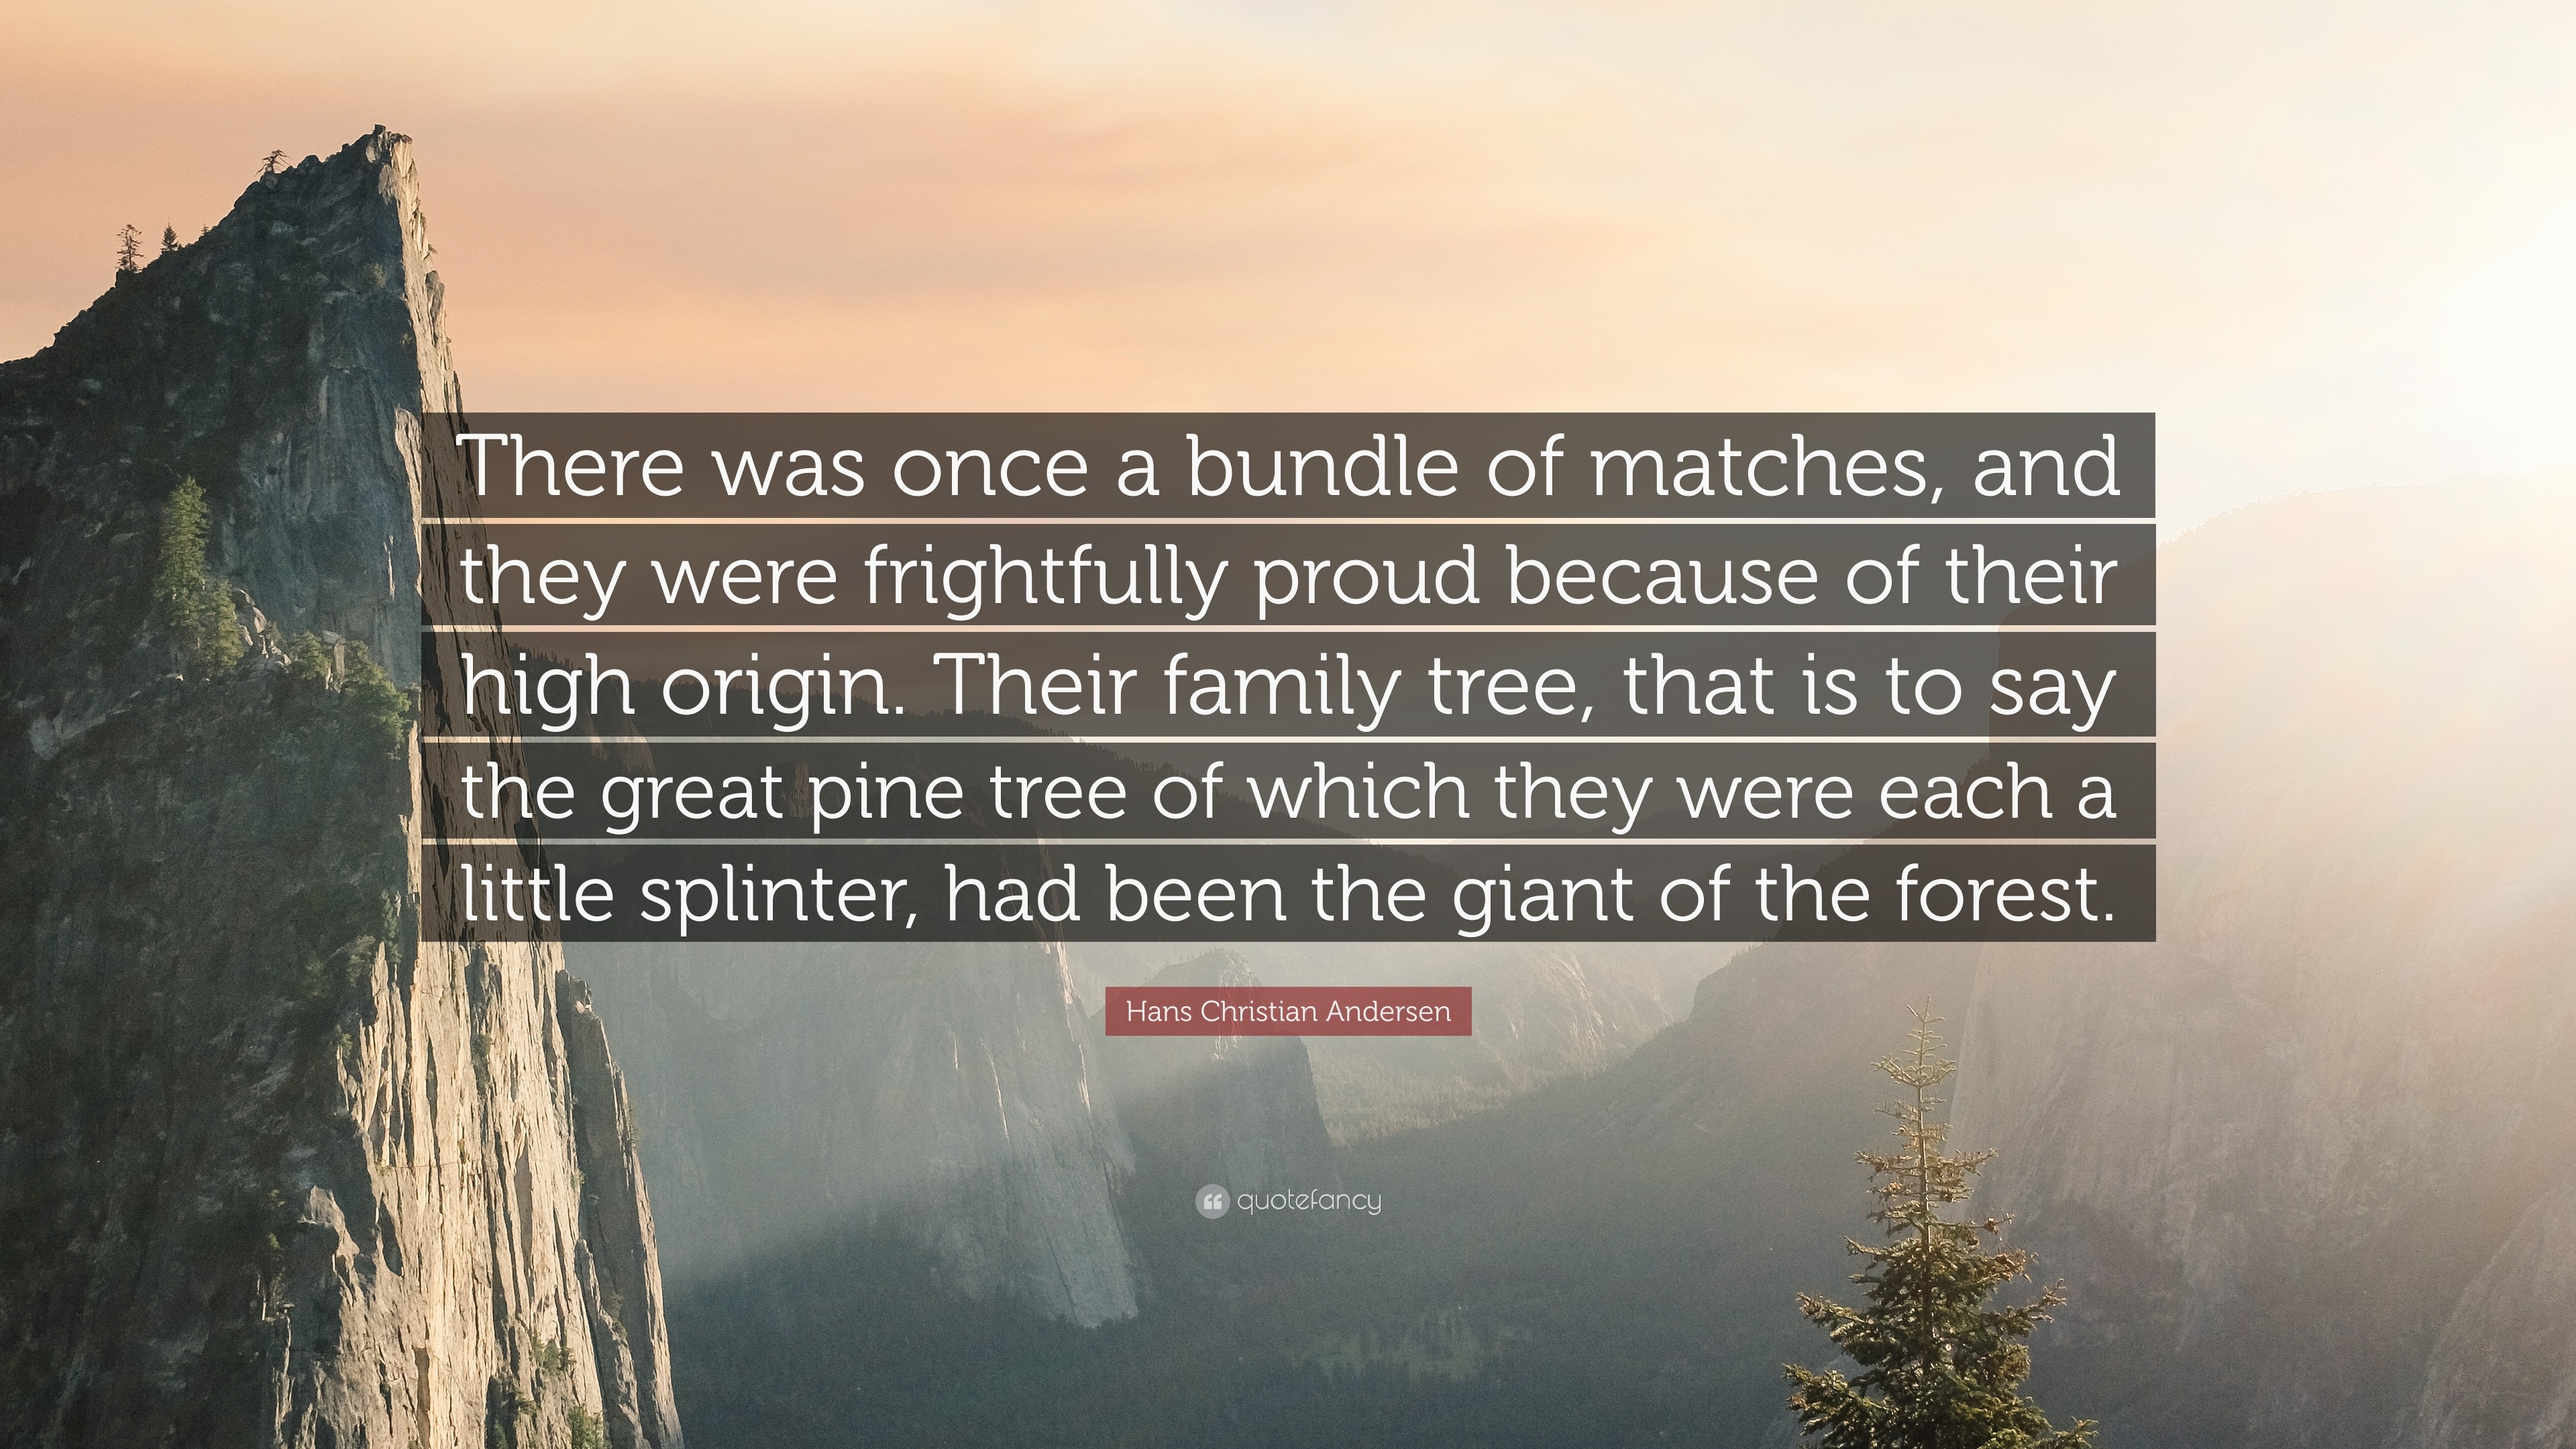 Download Hans Christian Andersen Quote There Was Once A Bundle Of Matches And They Were Frightfully Proud Because Of Their High Origin Their Family Tree Tha